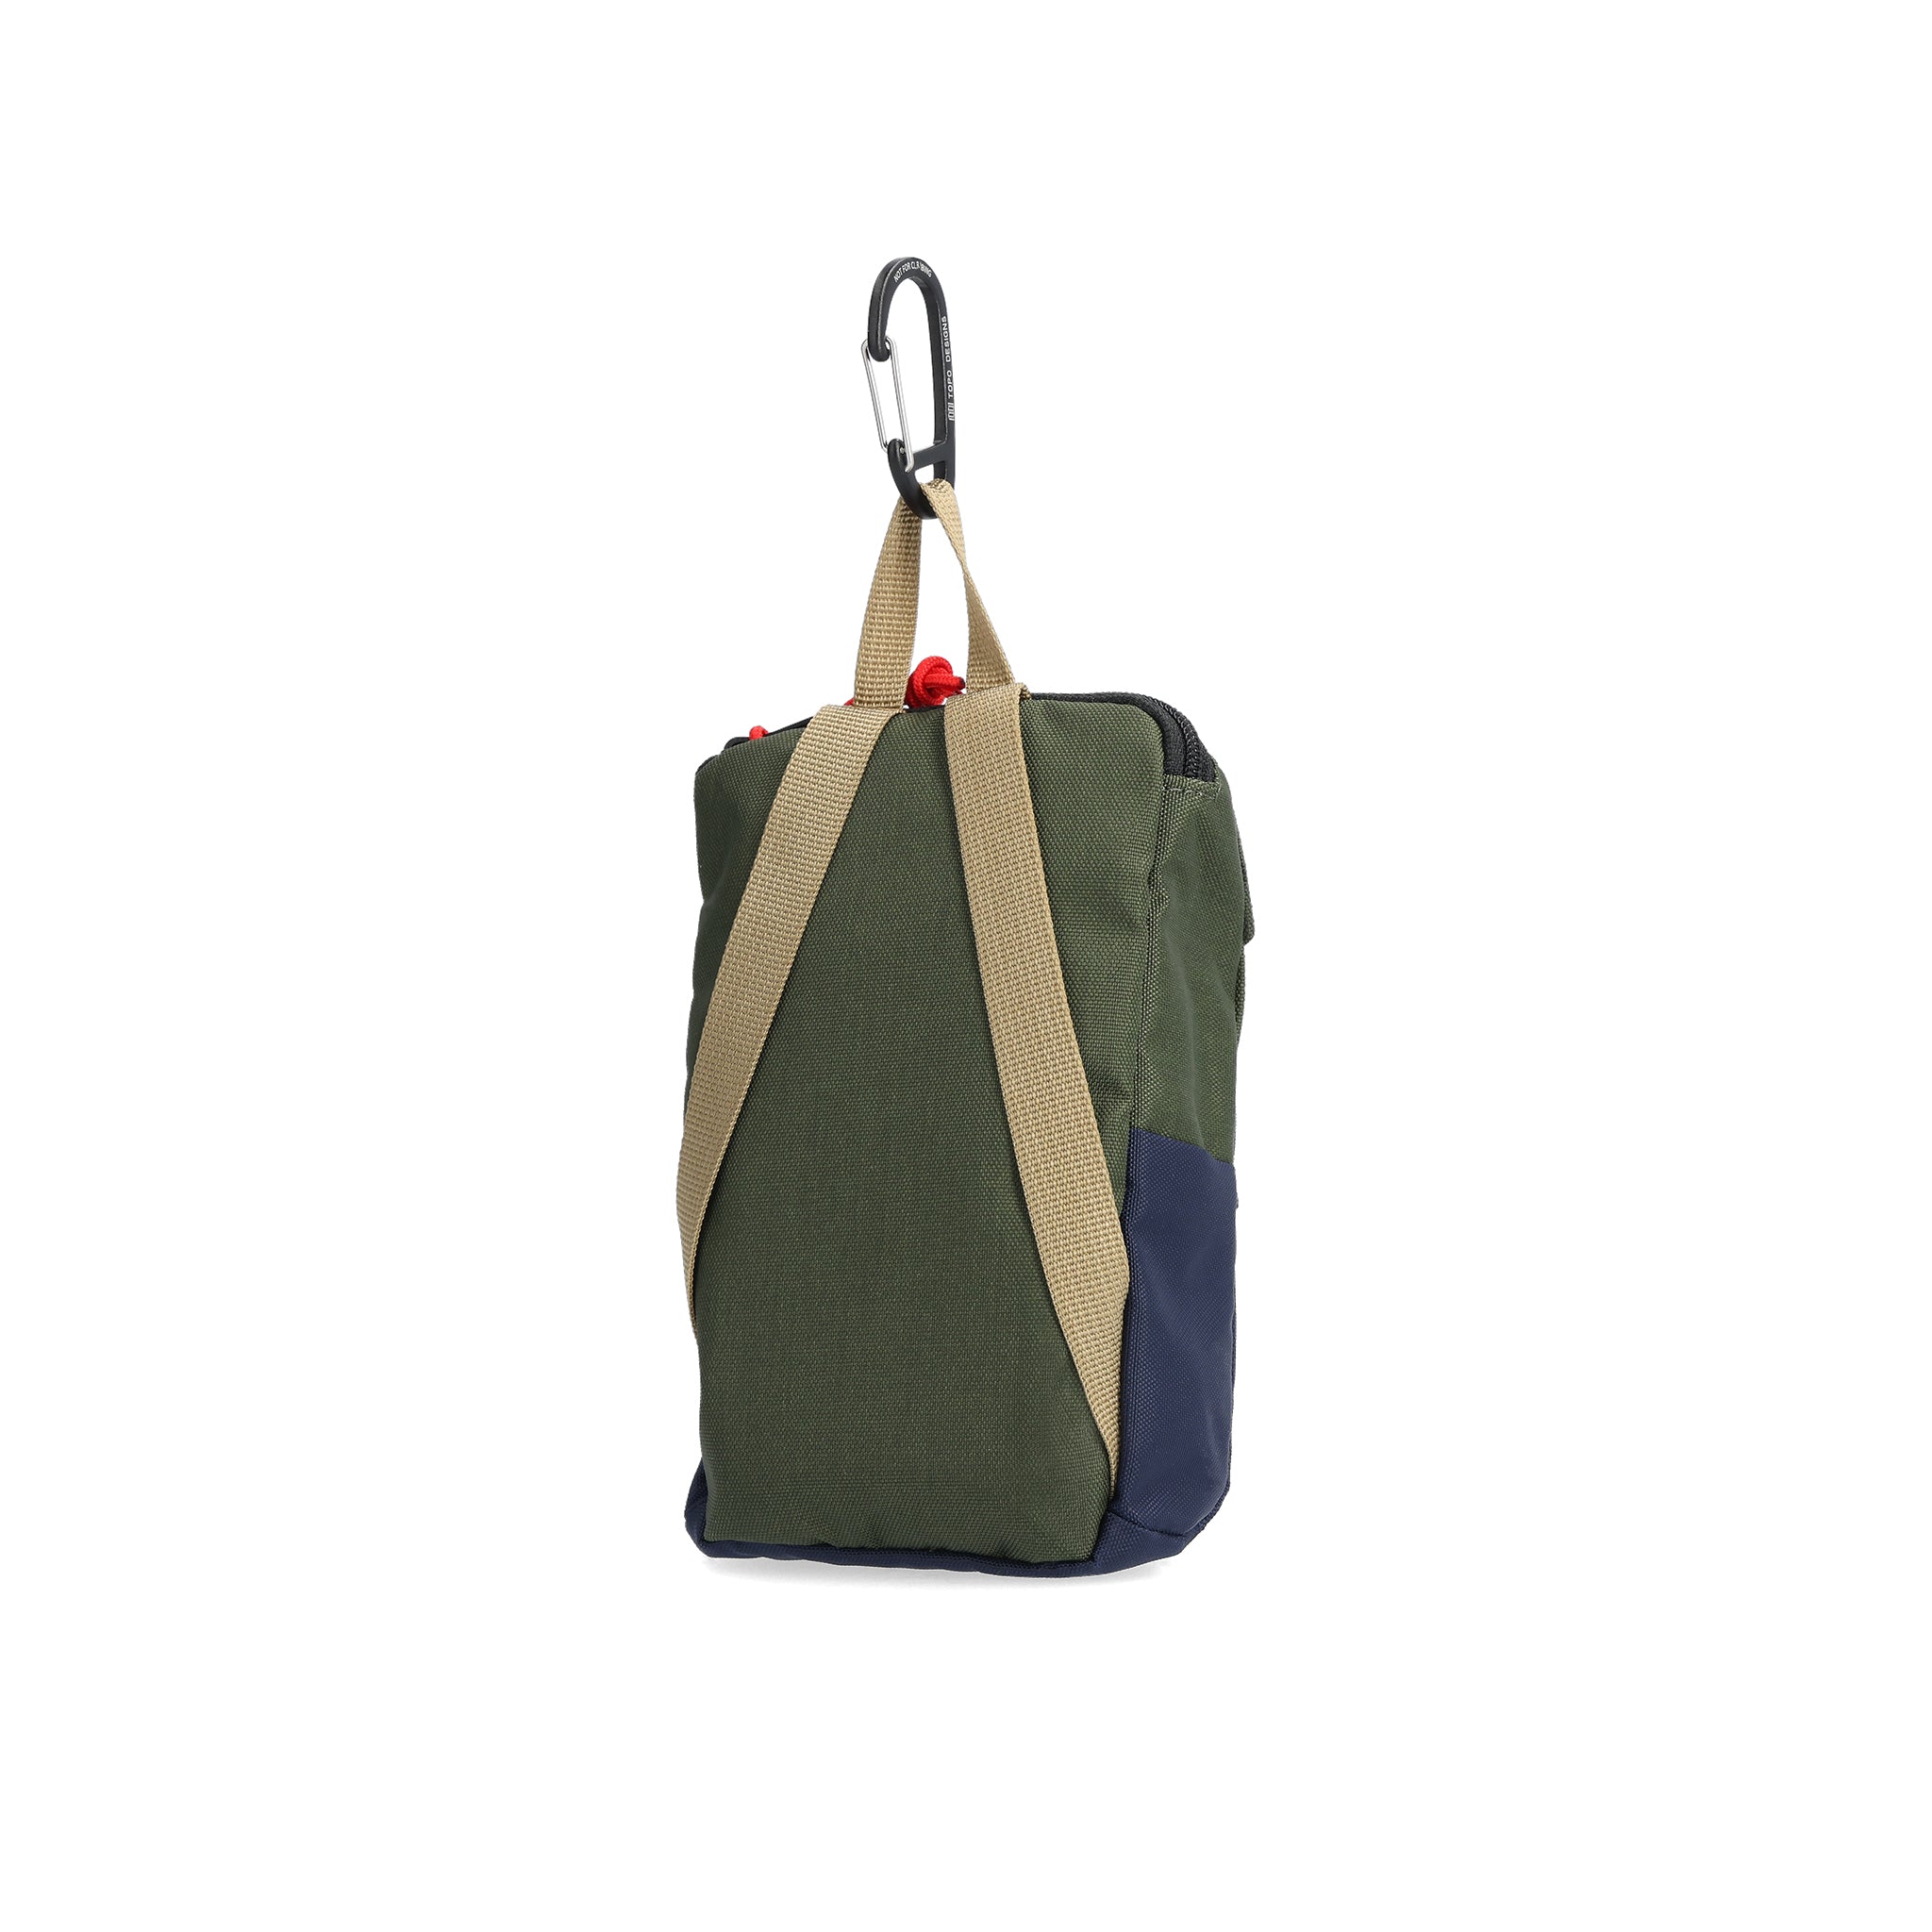 Back View of Topo Designs Rover Pack Micro in "Olive / Navy"